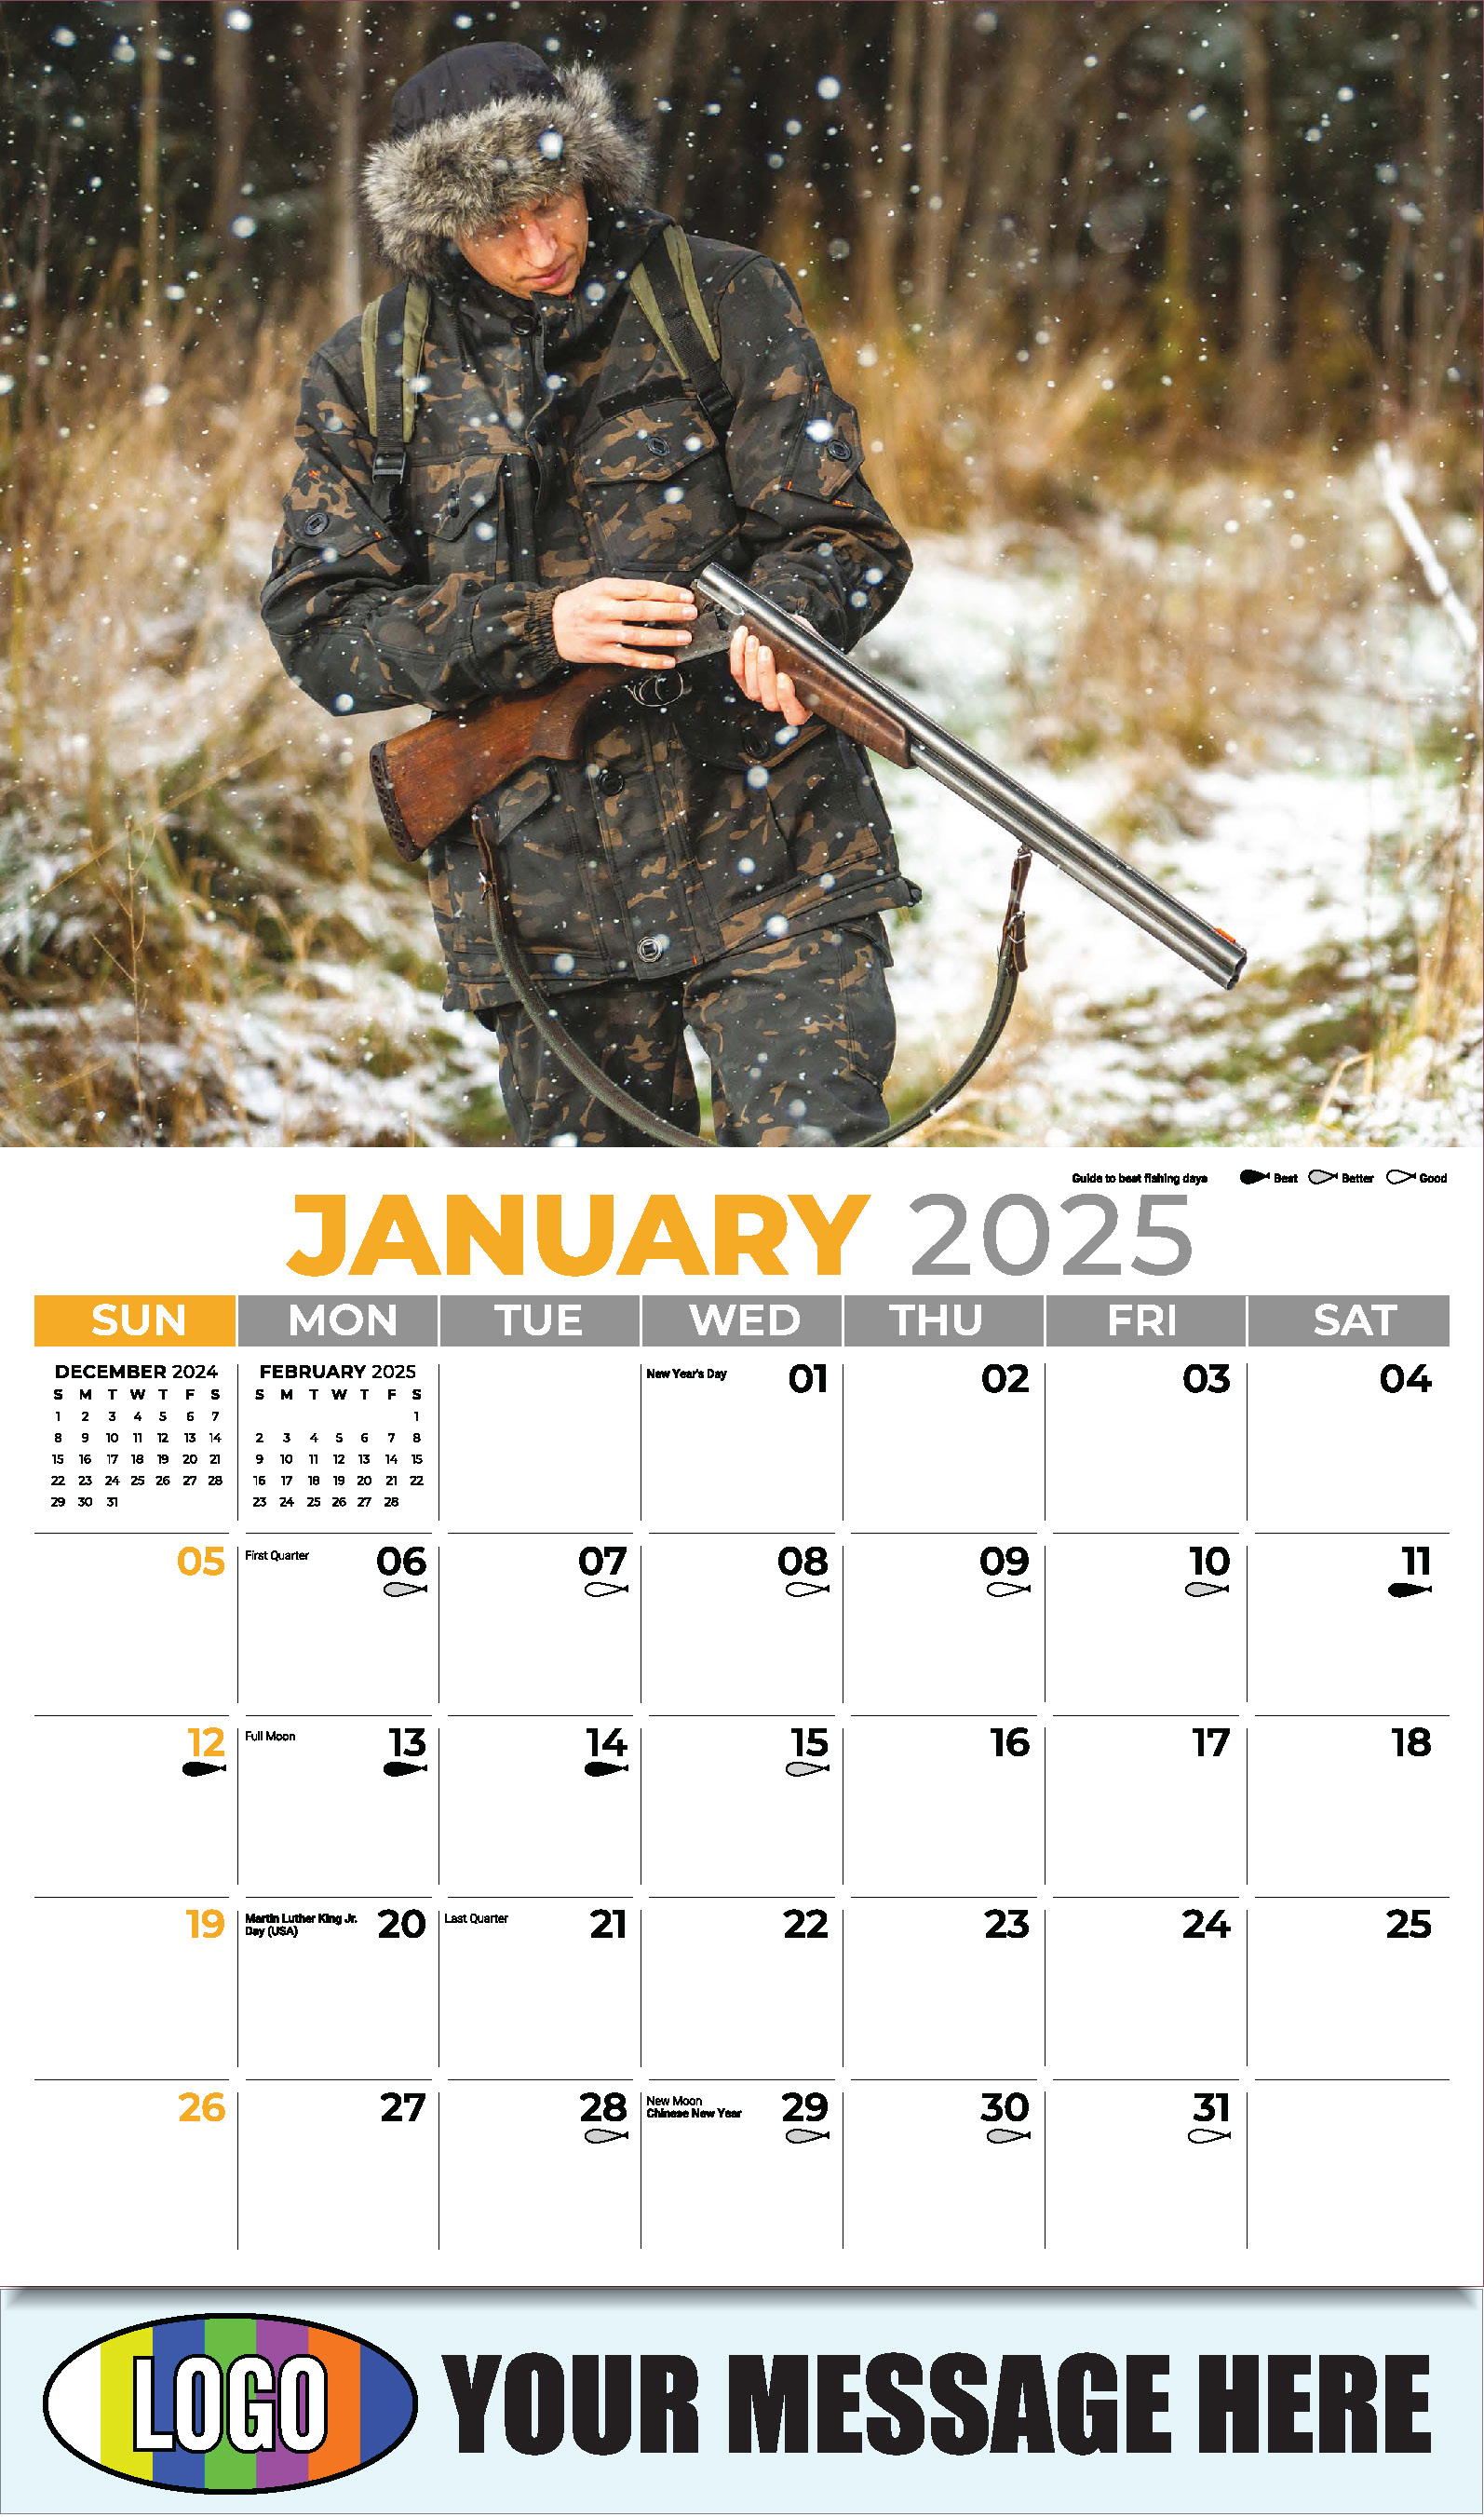 Fishing and Hunting 2025 Business Promotion Calendar - January